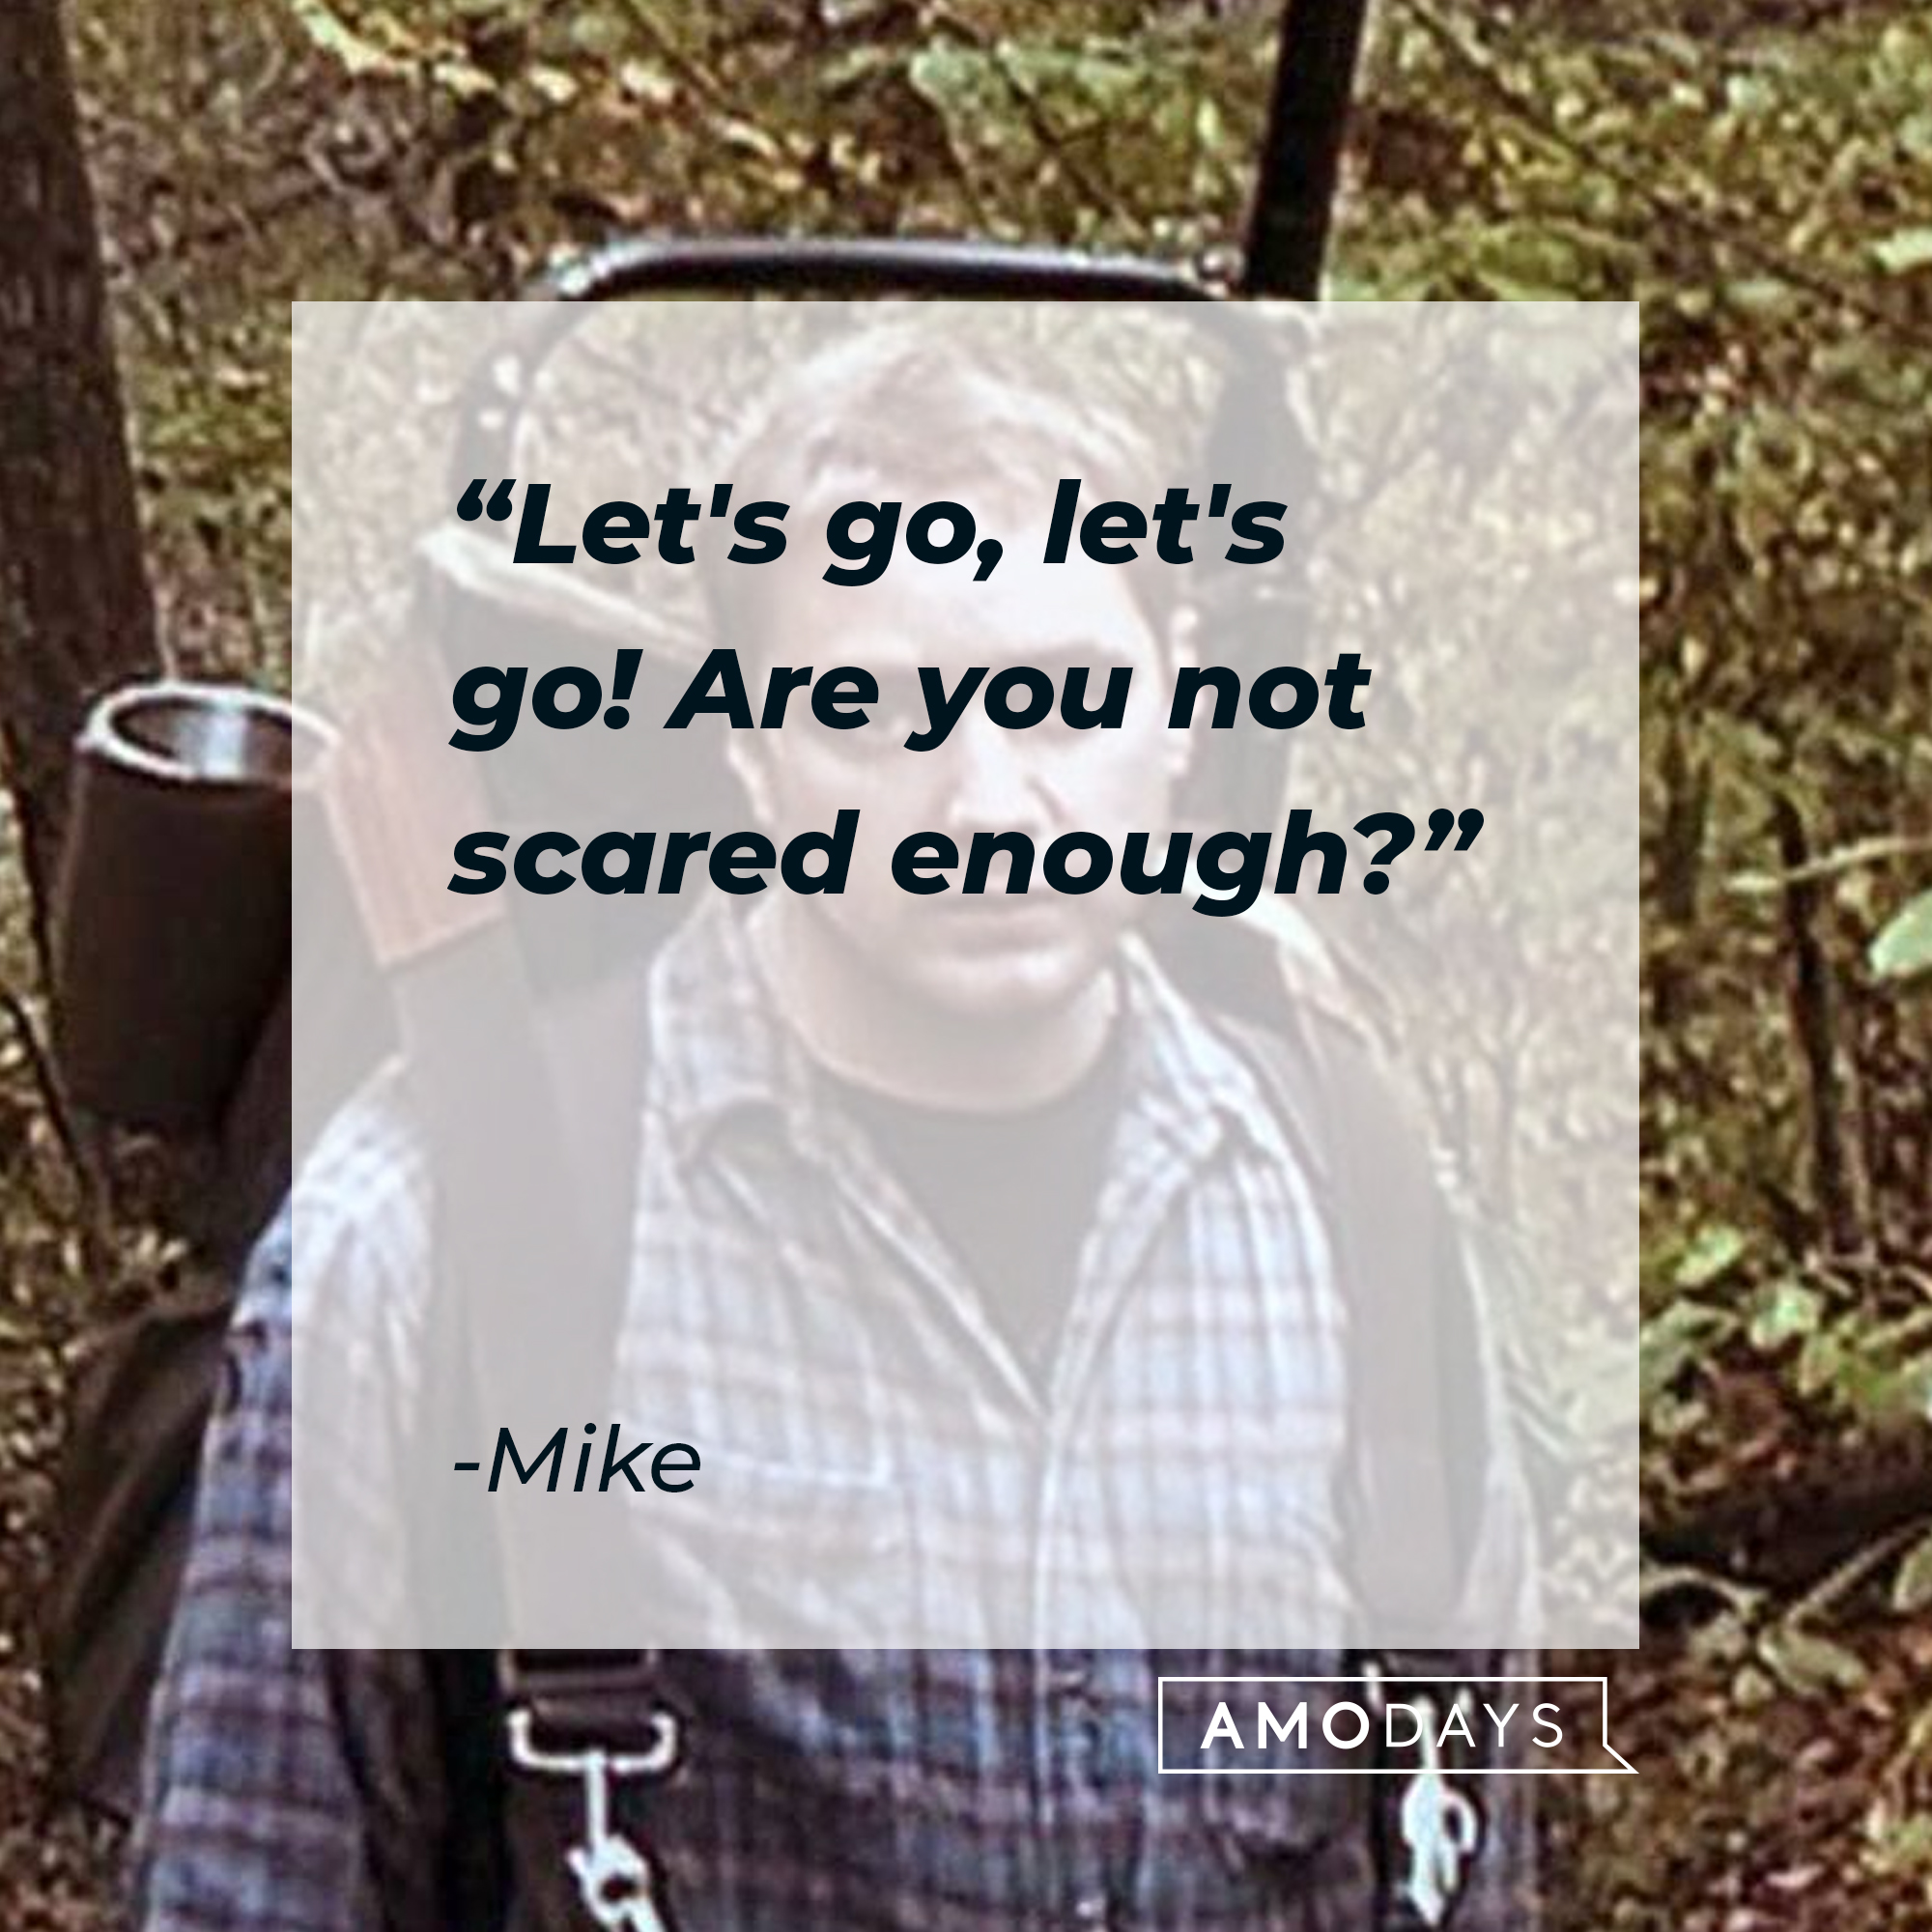 Mike's quote: “Let's go, let's go! Are you not scared enough?" | Source: facebook.com/blairwitchmovie